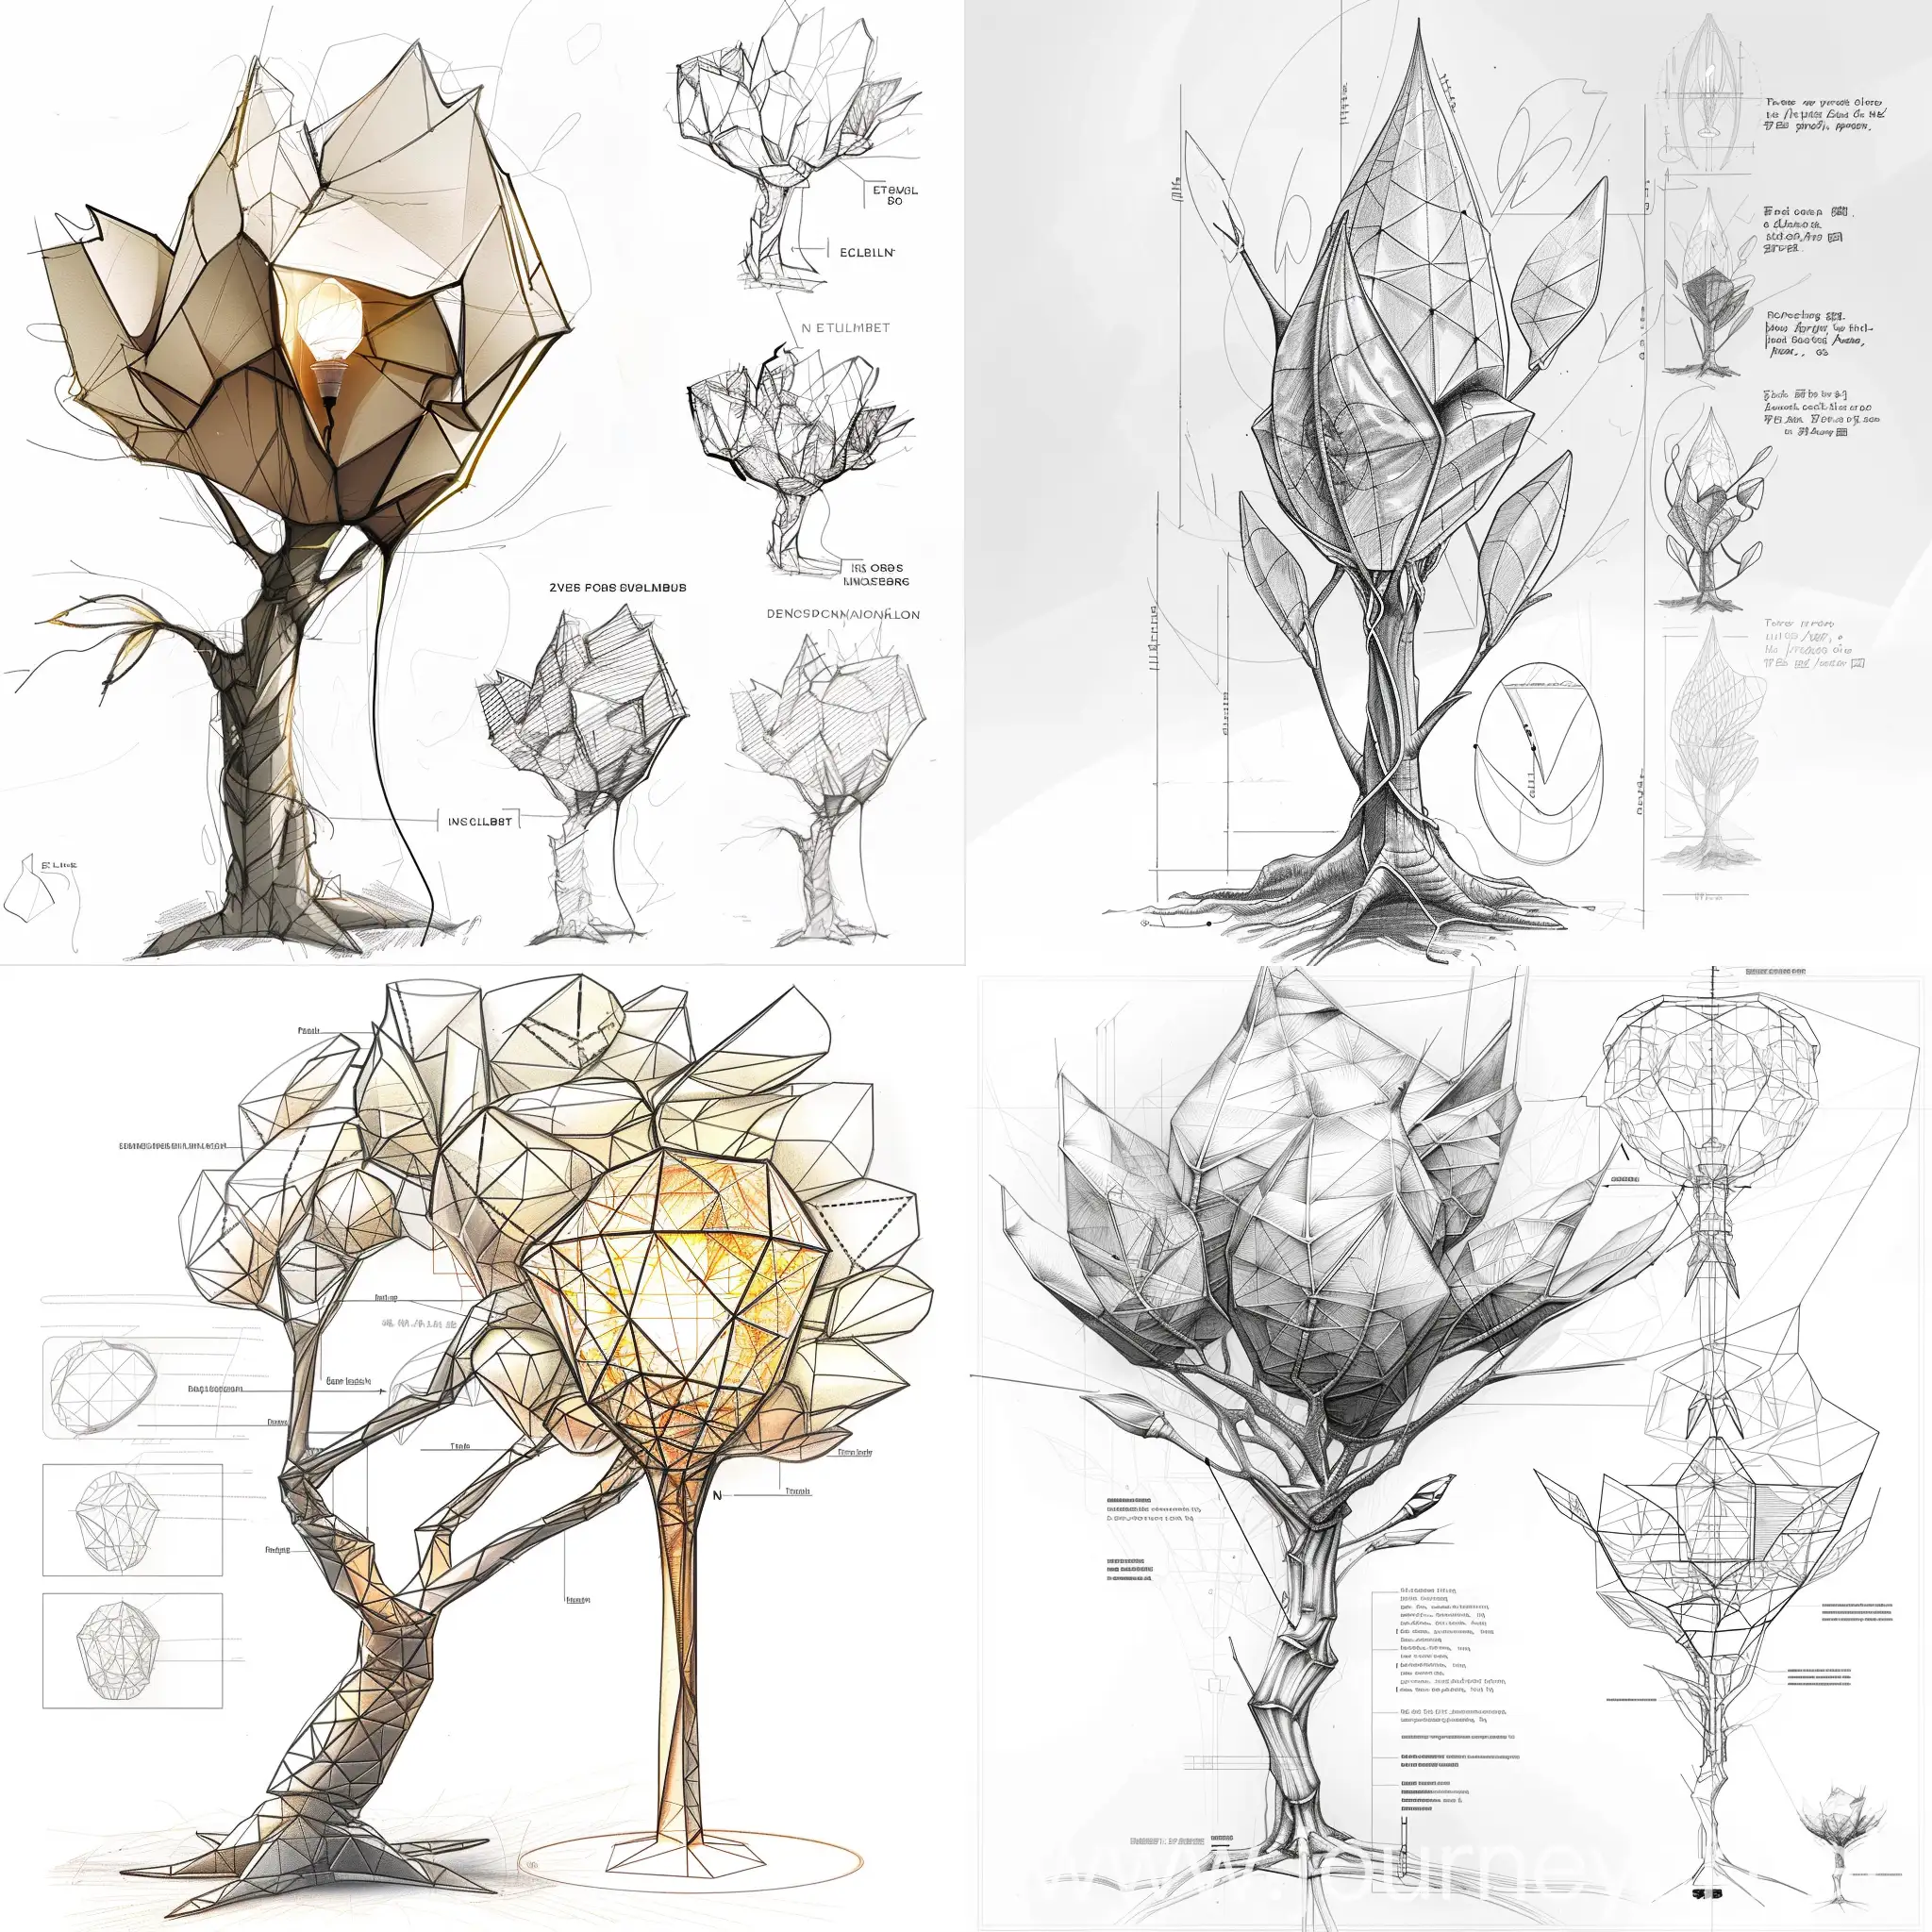 Hand-drawn product design, lighting design, extract the elements of the tree, the leaf part is the lamp, the trunk part can be affixed with notes
Extract geometric elements, bionic its texture bionic shape deduction change process, shape source, shape change, elaboration, summary process, how to draw lamps (desk lamp, chandelier, wall lamp), drawing reference, product design sketch, white background, front view, side view, back view, wire frame, no text, different Angle sketch, do not use any color, Pencil line manuscript, each scheme needs to present the form source and intention, the form change deliberation process; And the means to reconstruct and evolve the initial body form. The content includes the source of form, the change of form, the elaboration and the generalization process